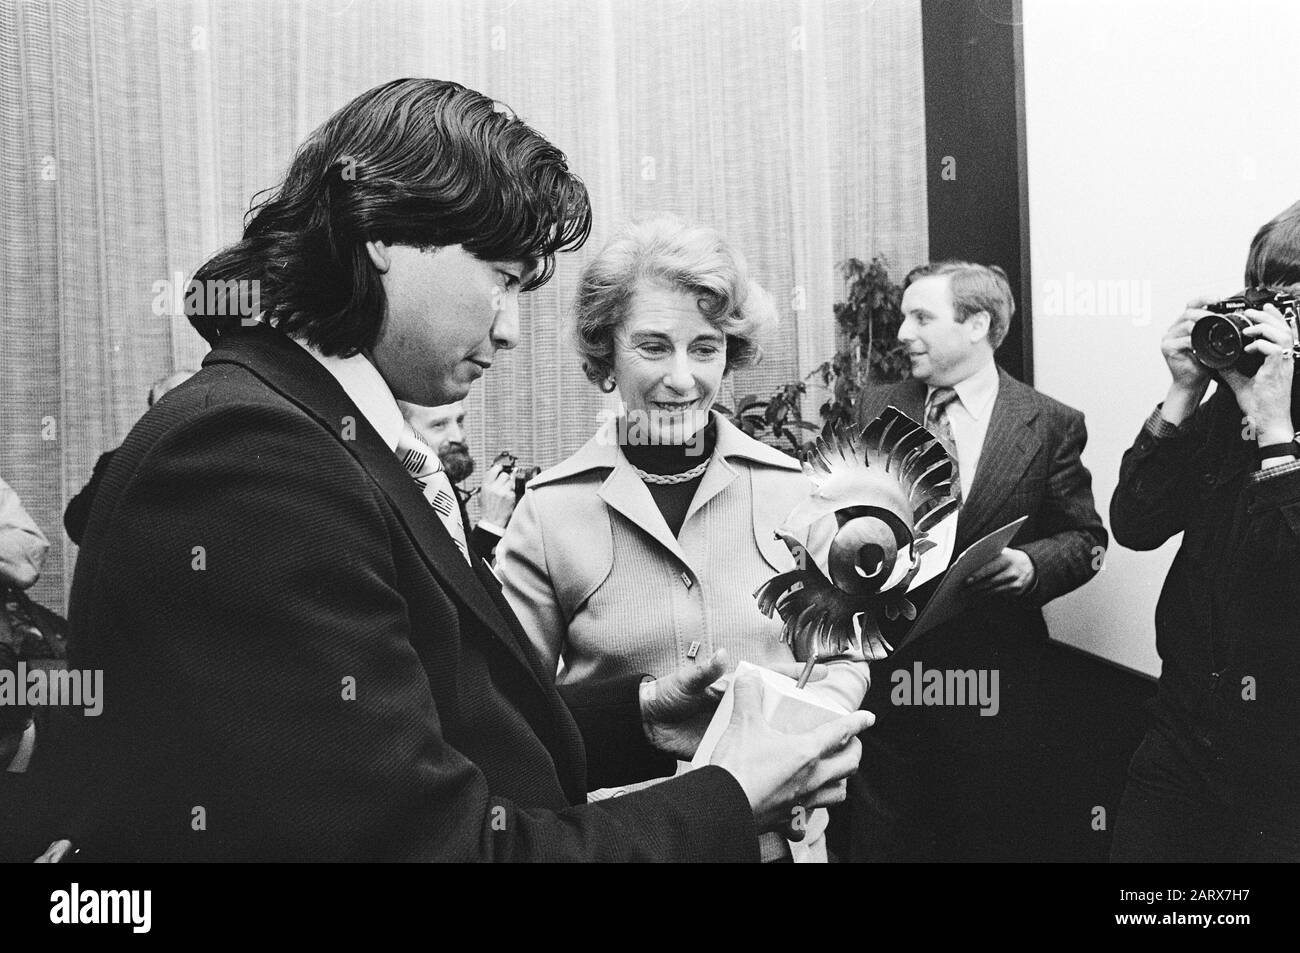 Award 1st prize World Press Photo  During the award ceremony the prize winner and ninister Gardeniers Date: April 4, 1979 Location: Amsterdam, Noord-Holland Keywords: photography, ministers, awards Personal name: Gardeniers, Til, Mikami, Sadayuki Stock Photo